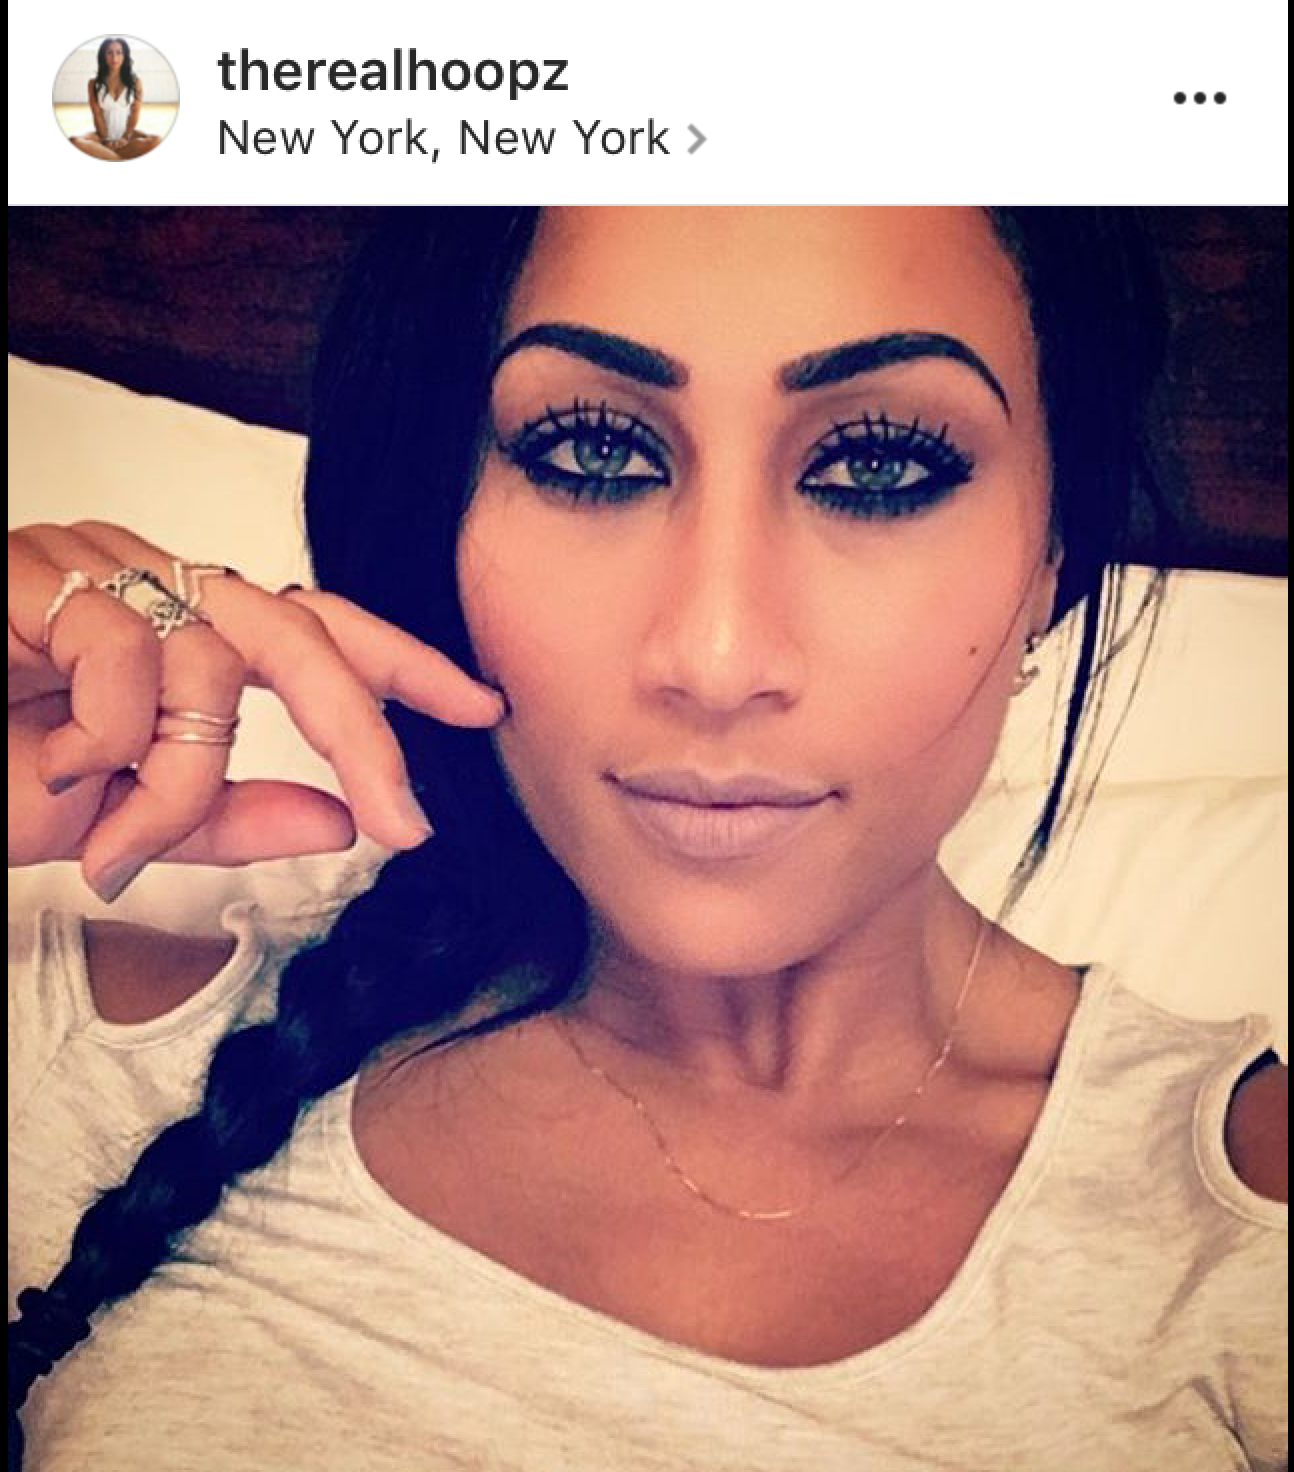 Hoopz from flava of love